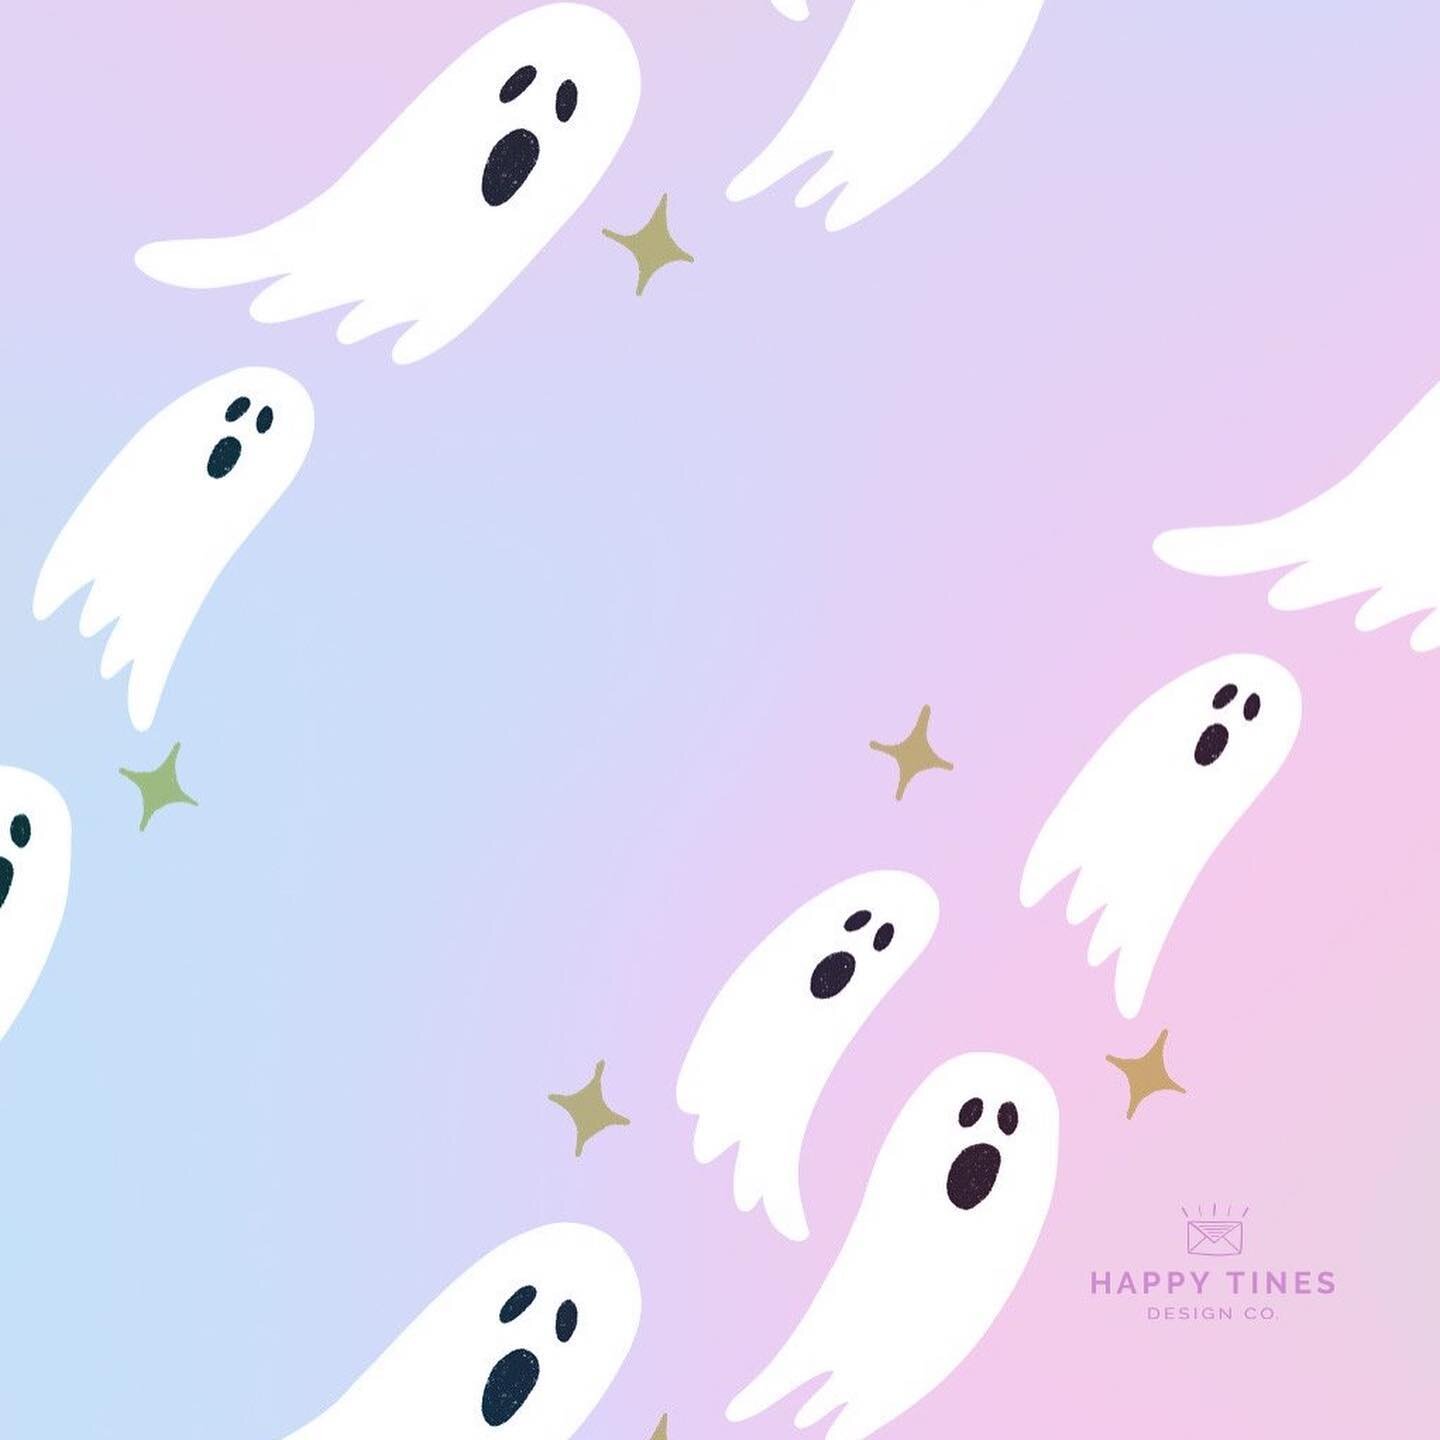 The October wallpaper is here and it&rsquo;s a spooky cute one! 👻 My monthly newsletter also went out today and it&rsquo;s filled with lots of fun updates so don&rsquo;t miss it! Download your wallpaper freebie via the link in my profile💜